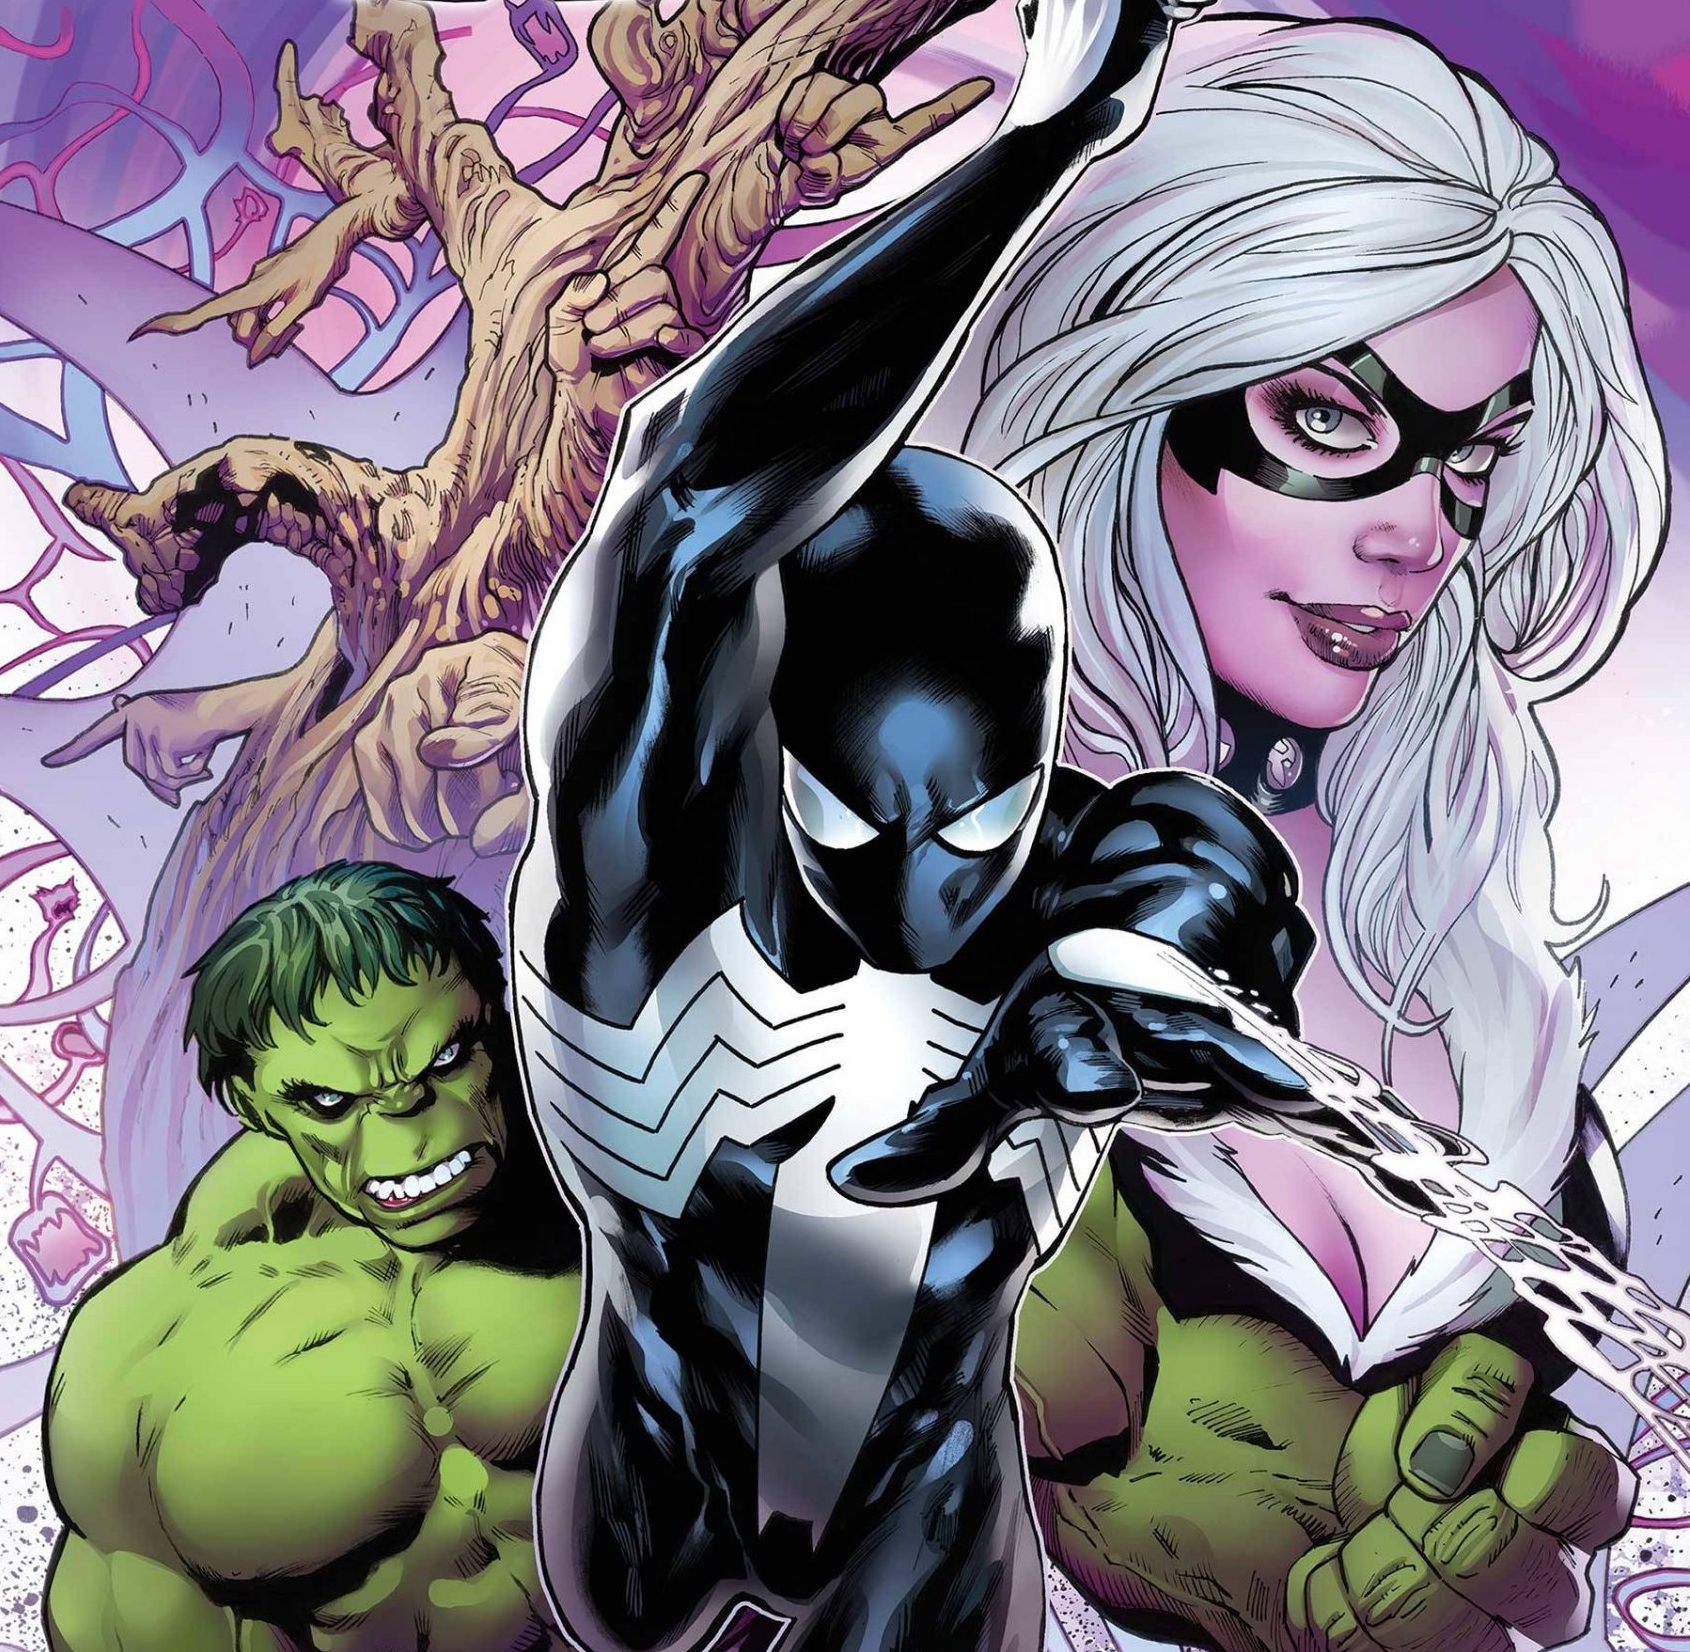 'Symbiote Spider-Man: Crossroads' #1 uses unknown Marvel elements with mixed results